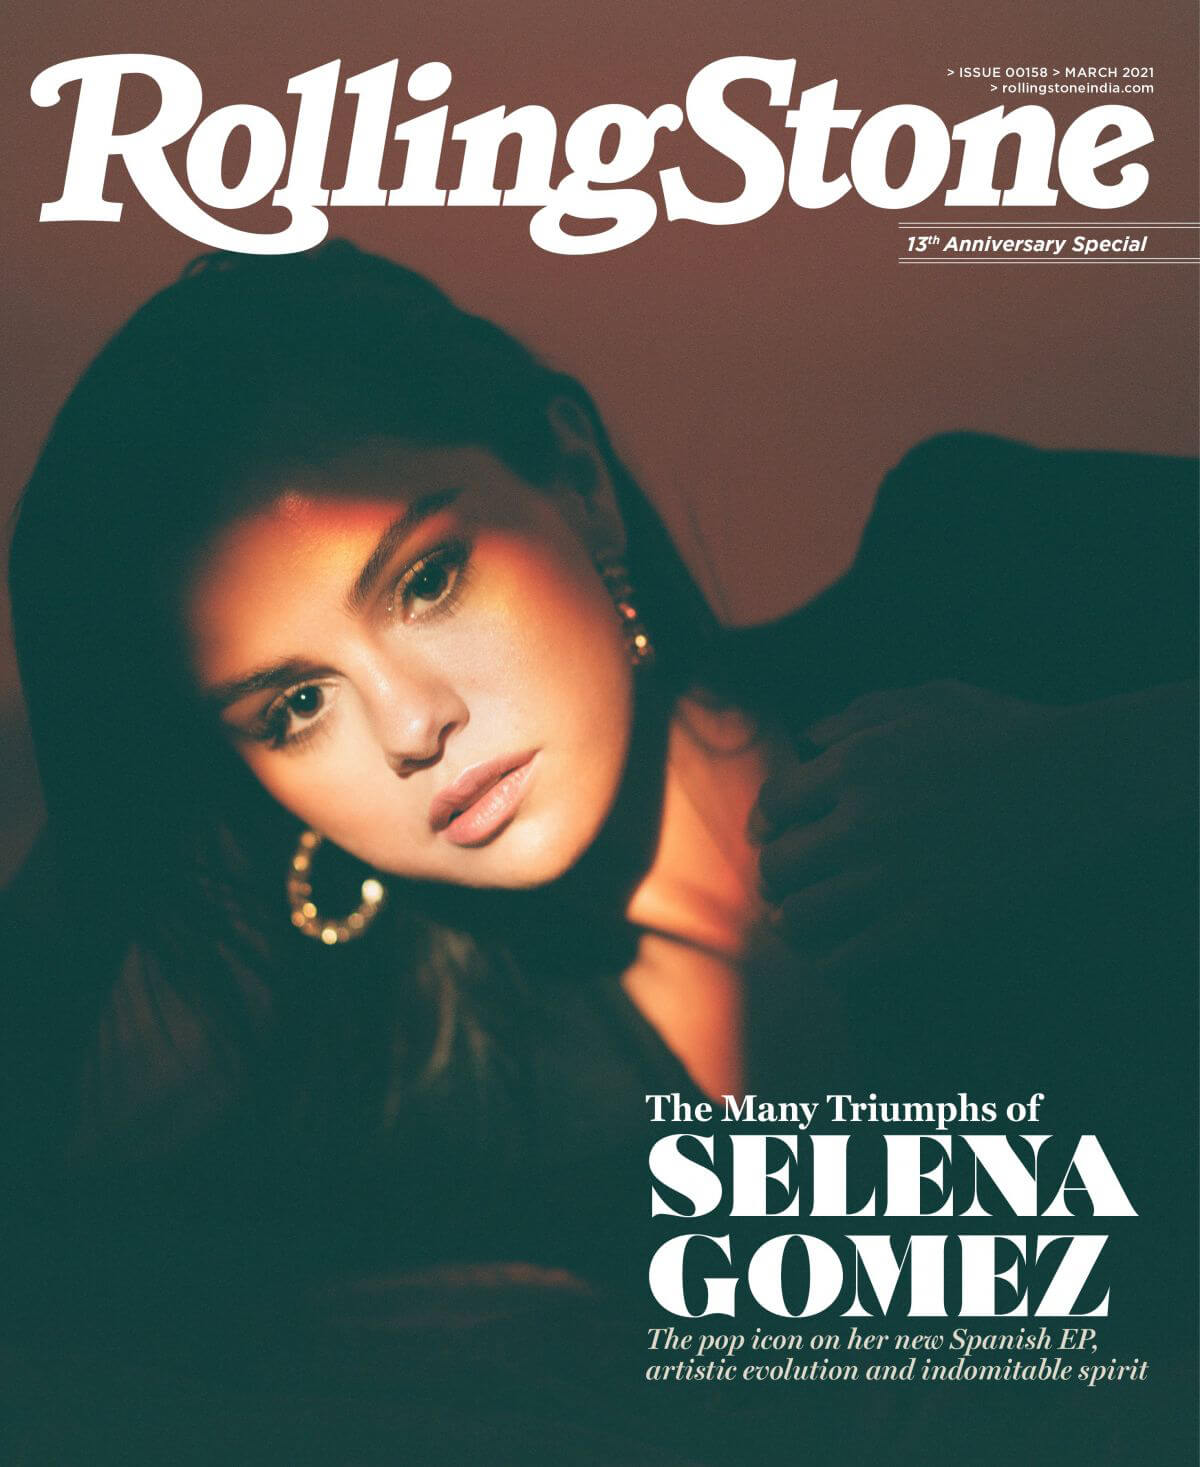 Selena Gomez on the Cover Page of Rolling Stone Magazine, India March 2021